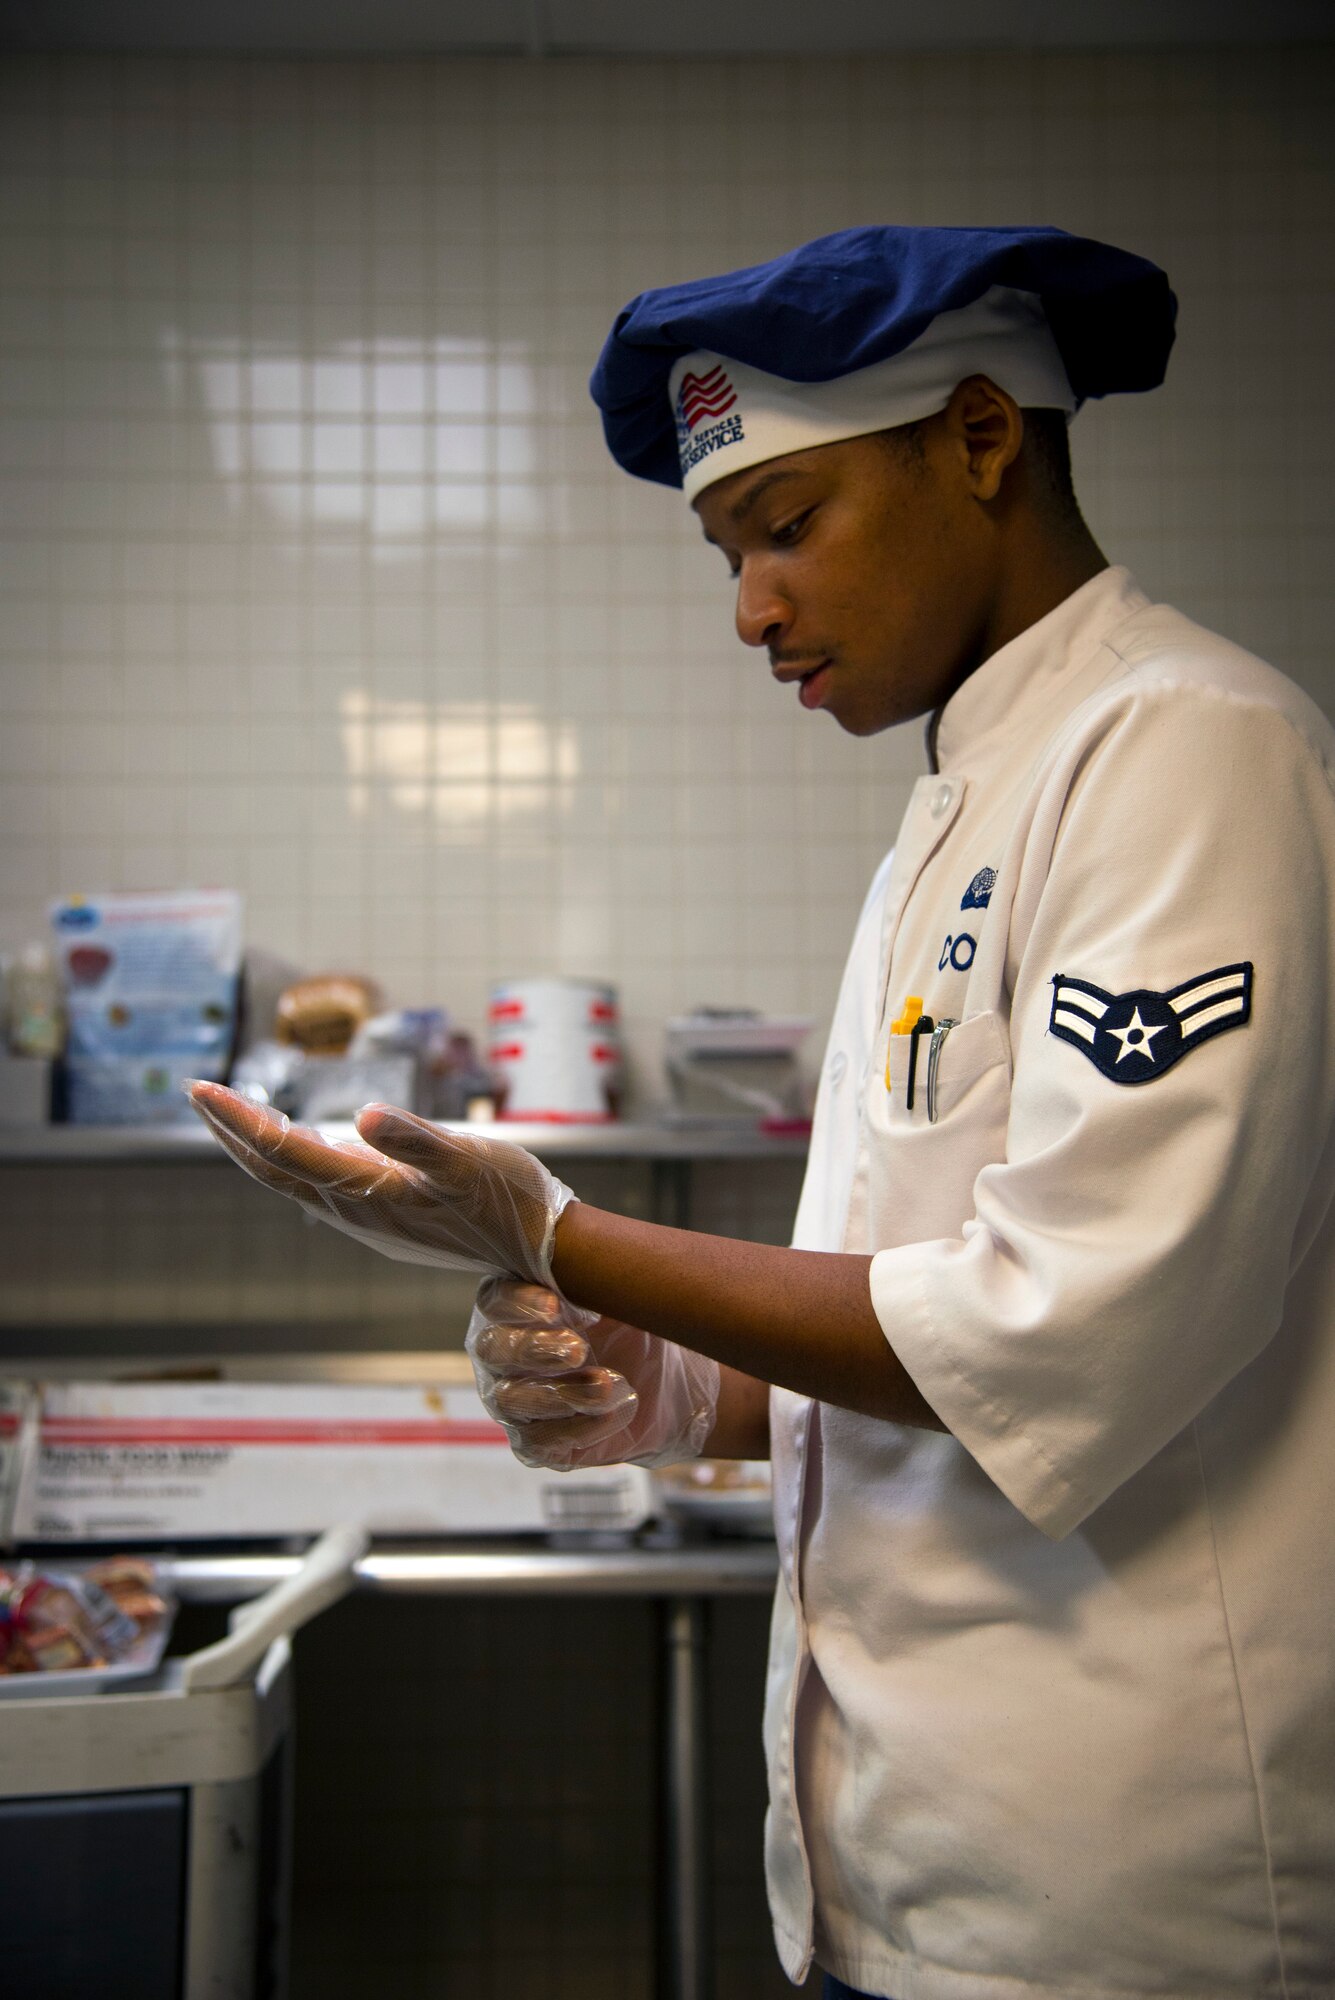 U.S. Air Force Airman 1st Class Kobe Cole, a food service journeyman assigned to the 6th Force Support Squadron, puts on sterile gloves at the Diner’s Reef dining facility on MacDill Air Force Base, Fla., May 30, 2018.